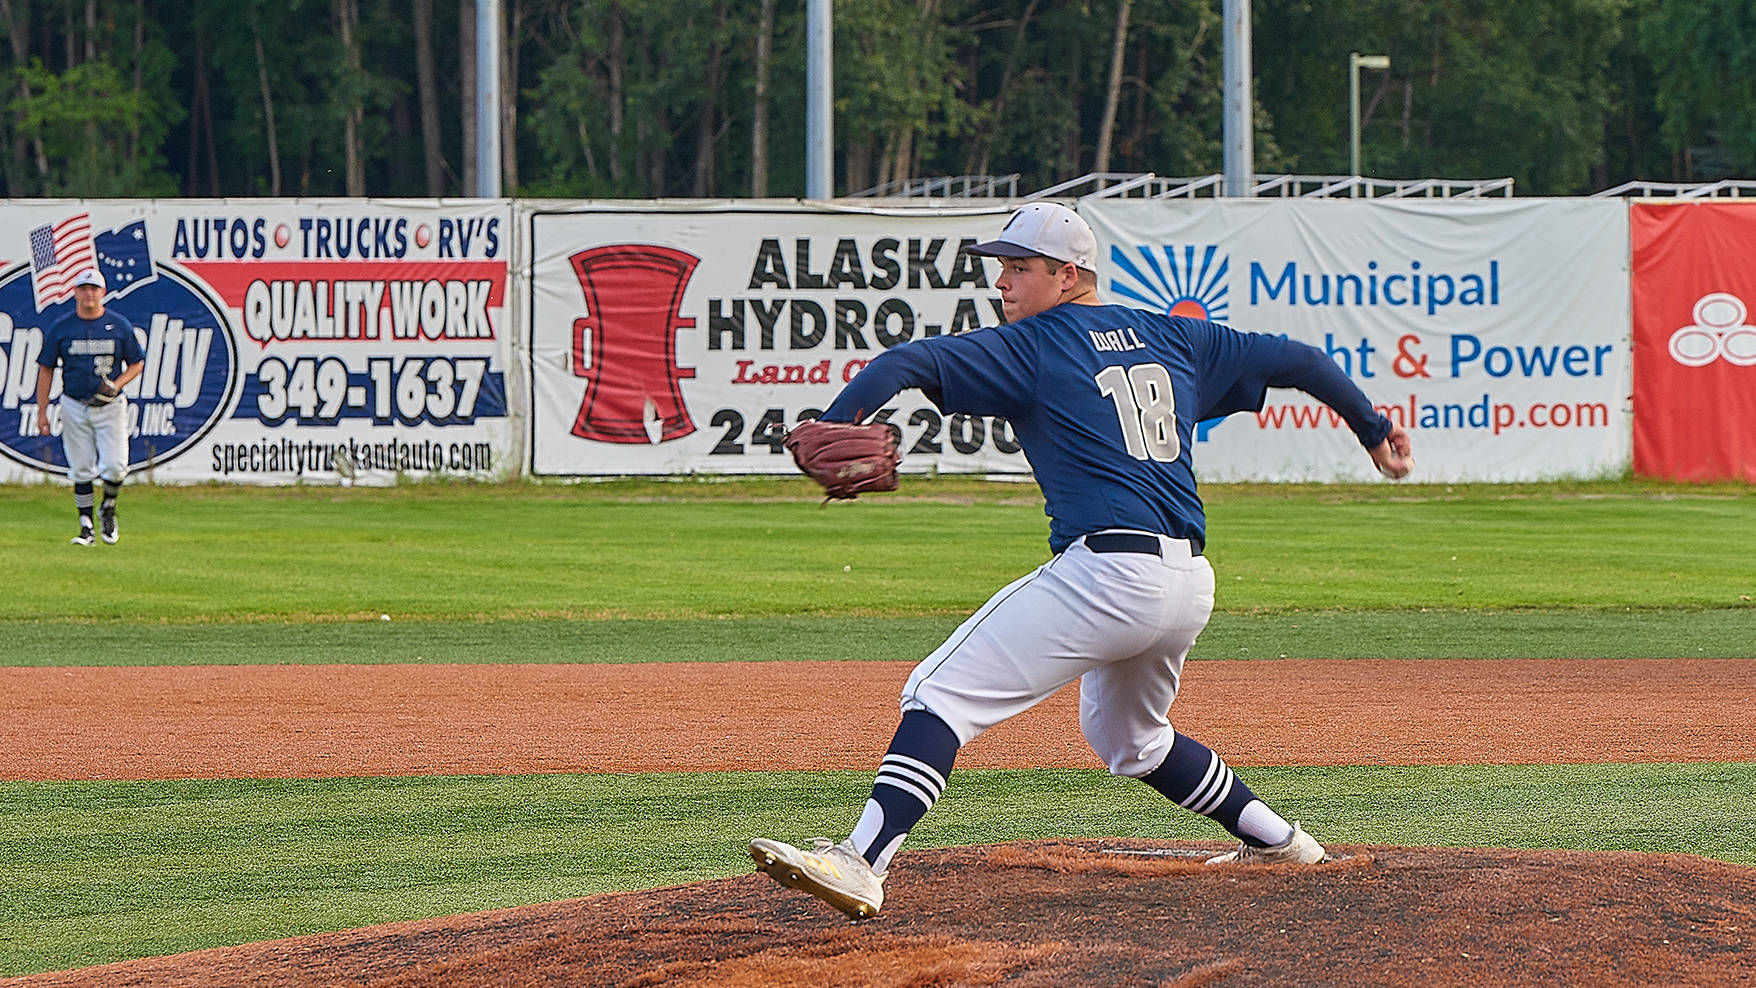 Juneau Post 25 pitcher Philip Wall pitches in the American Legion state championship game against Dimond Post 21 on Tuesday at Mulcahy Stadium in Anchorage. Wall was named the tournament’s most valuable player. (Courtesy Photo | Jeremy Ludeman)